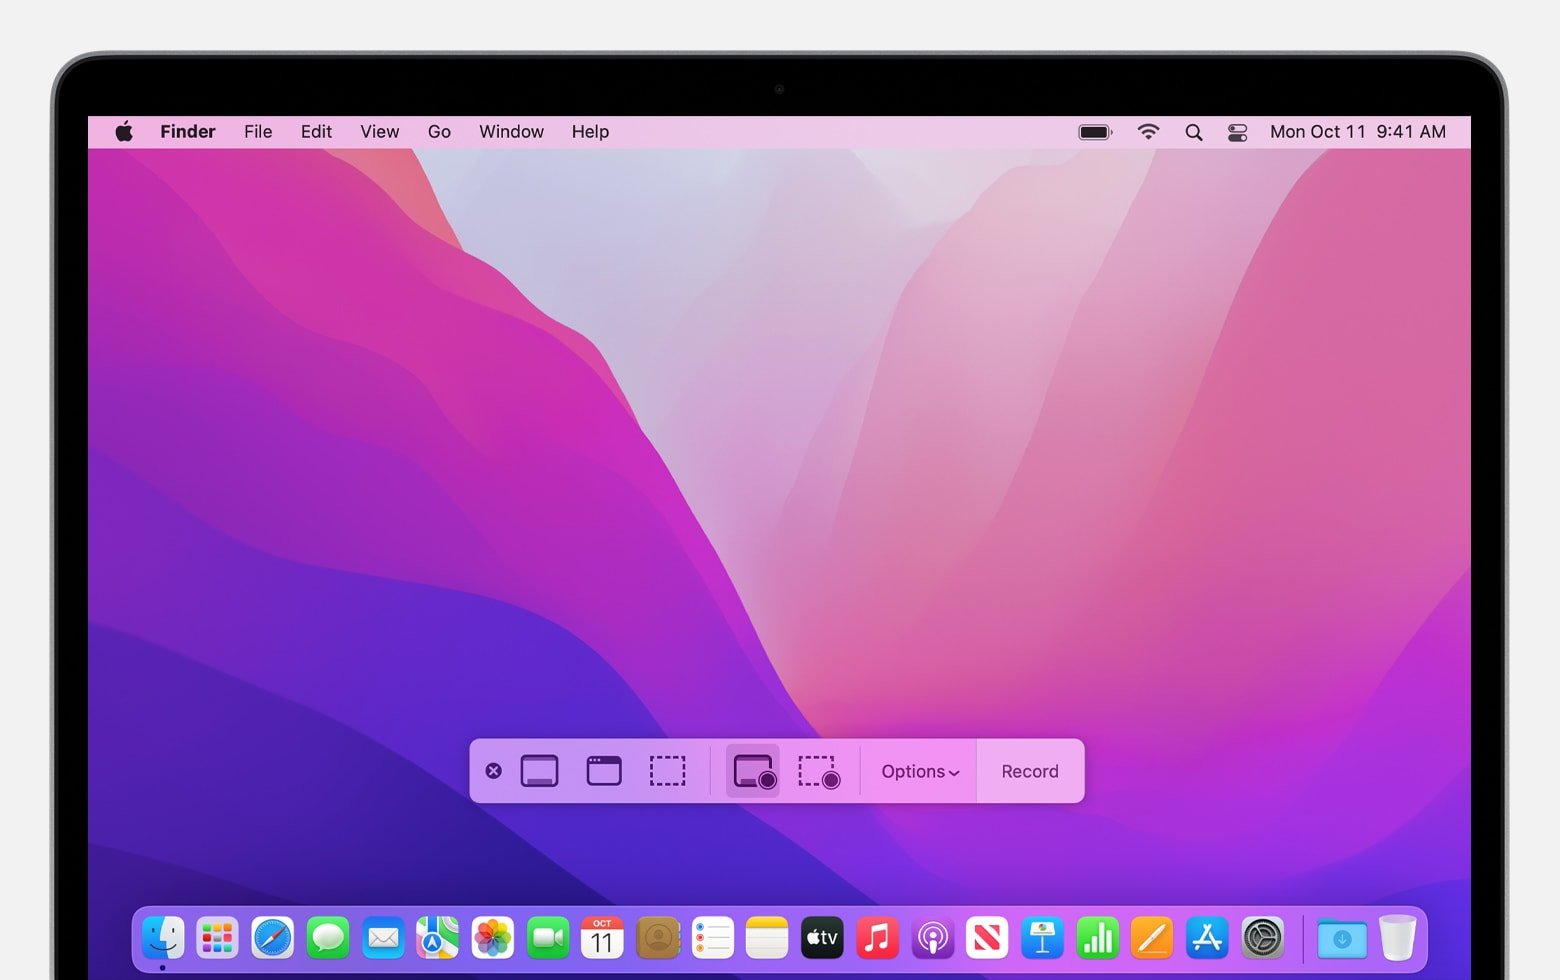 How to Screen Record with Audio on Mac